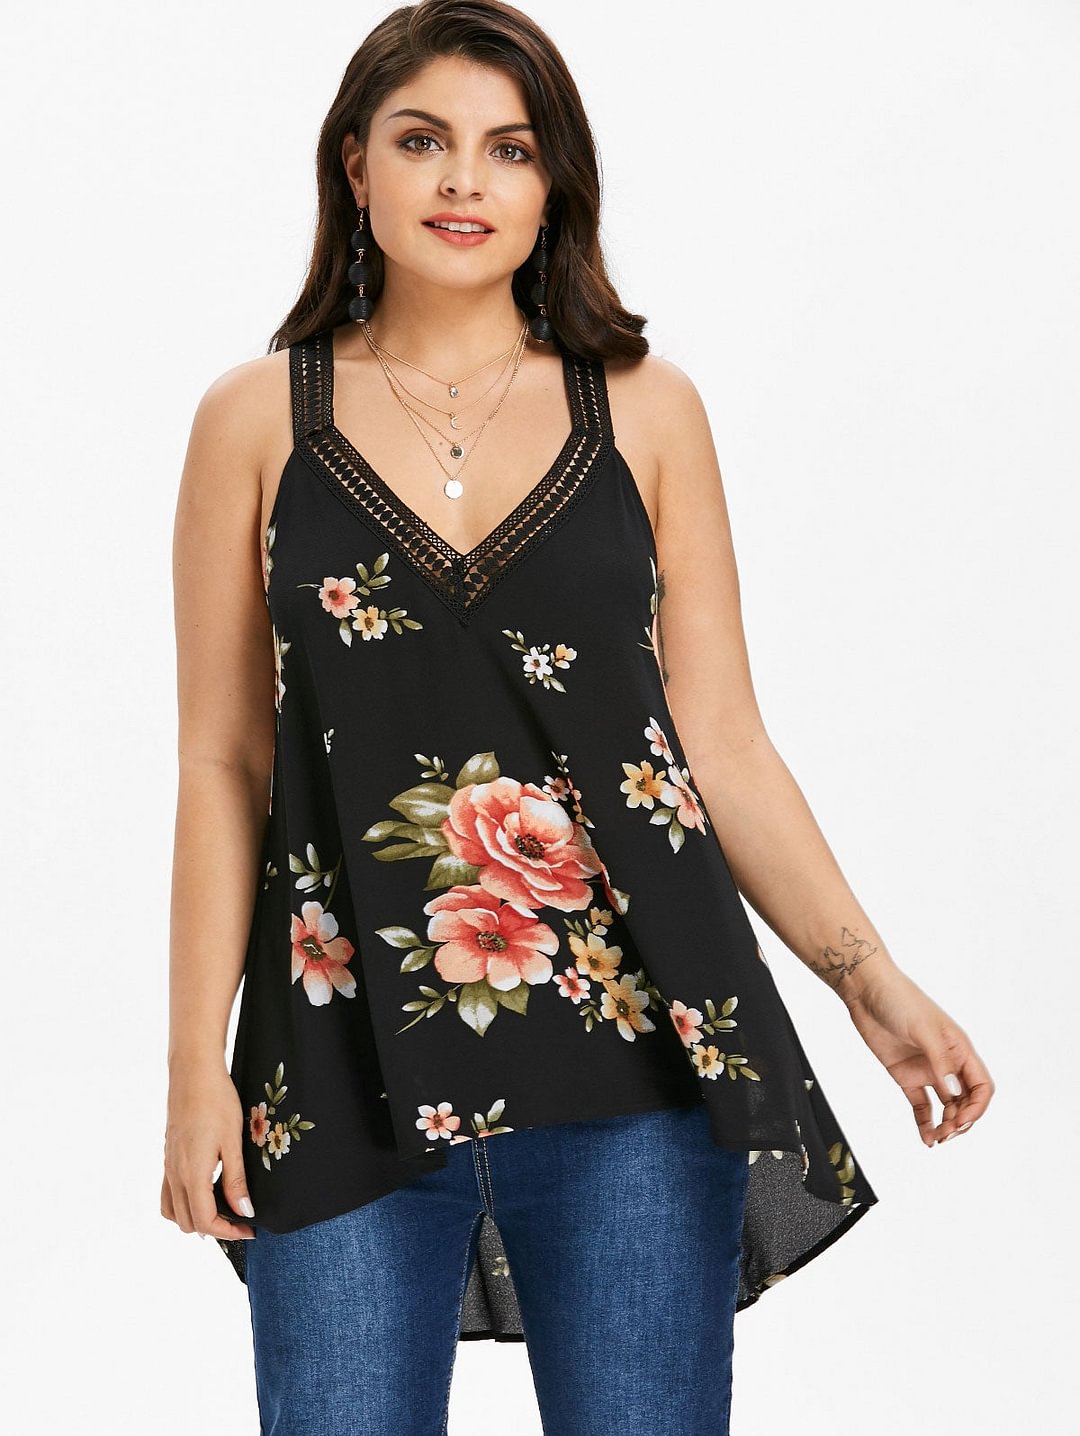 Plus Size 5XL V Neck Floral Dip Hem Tank Top Women Lace Strap Sleeveless Casual Tops Tees Summer Big Size Long Clothes